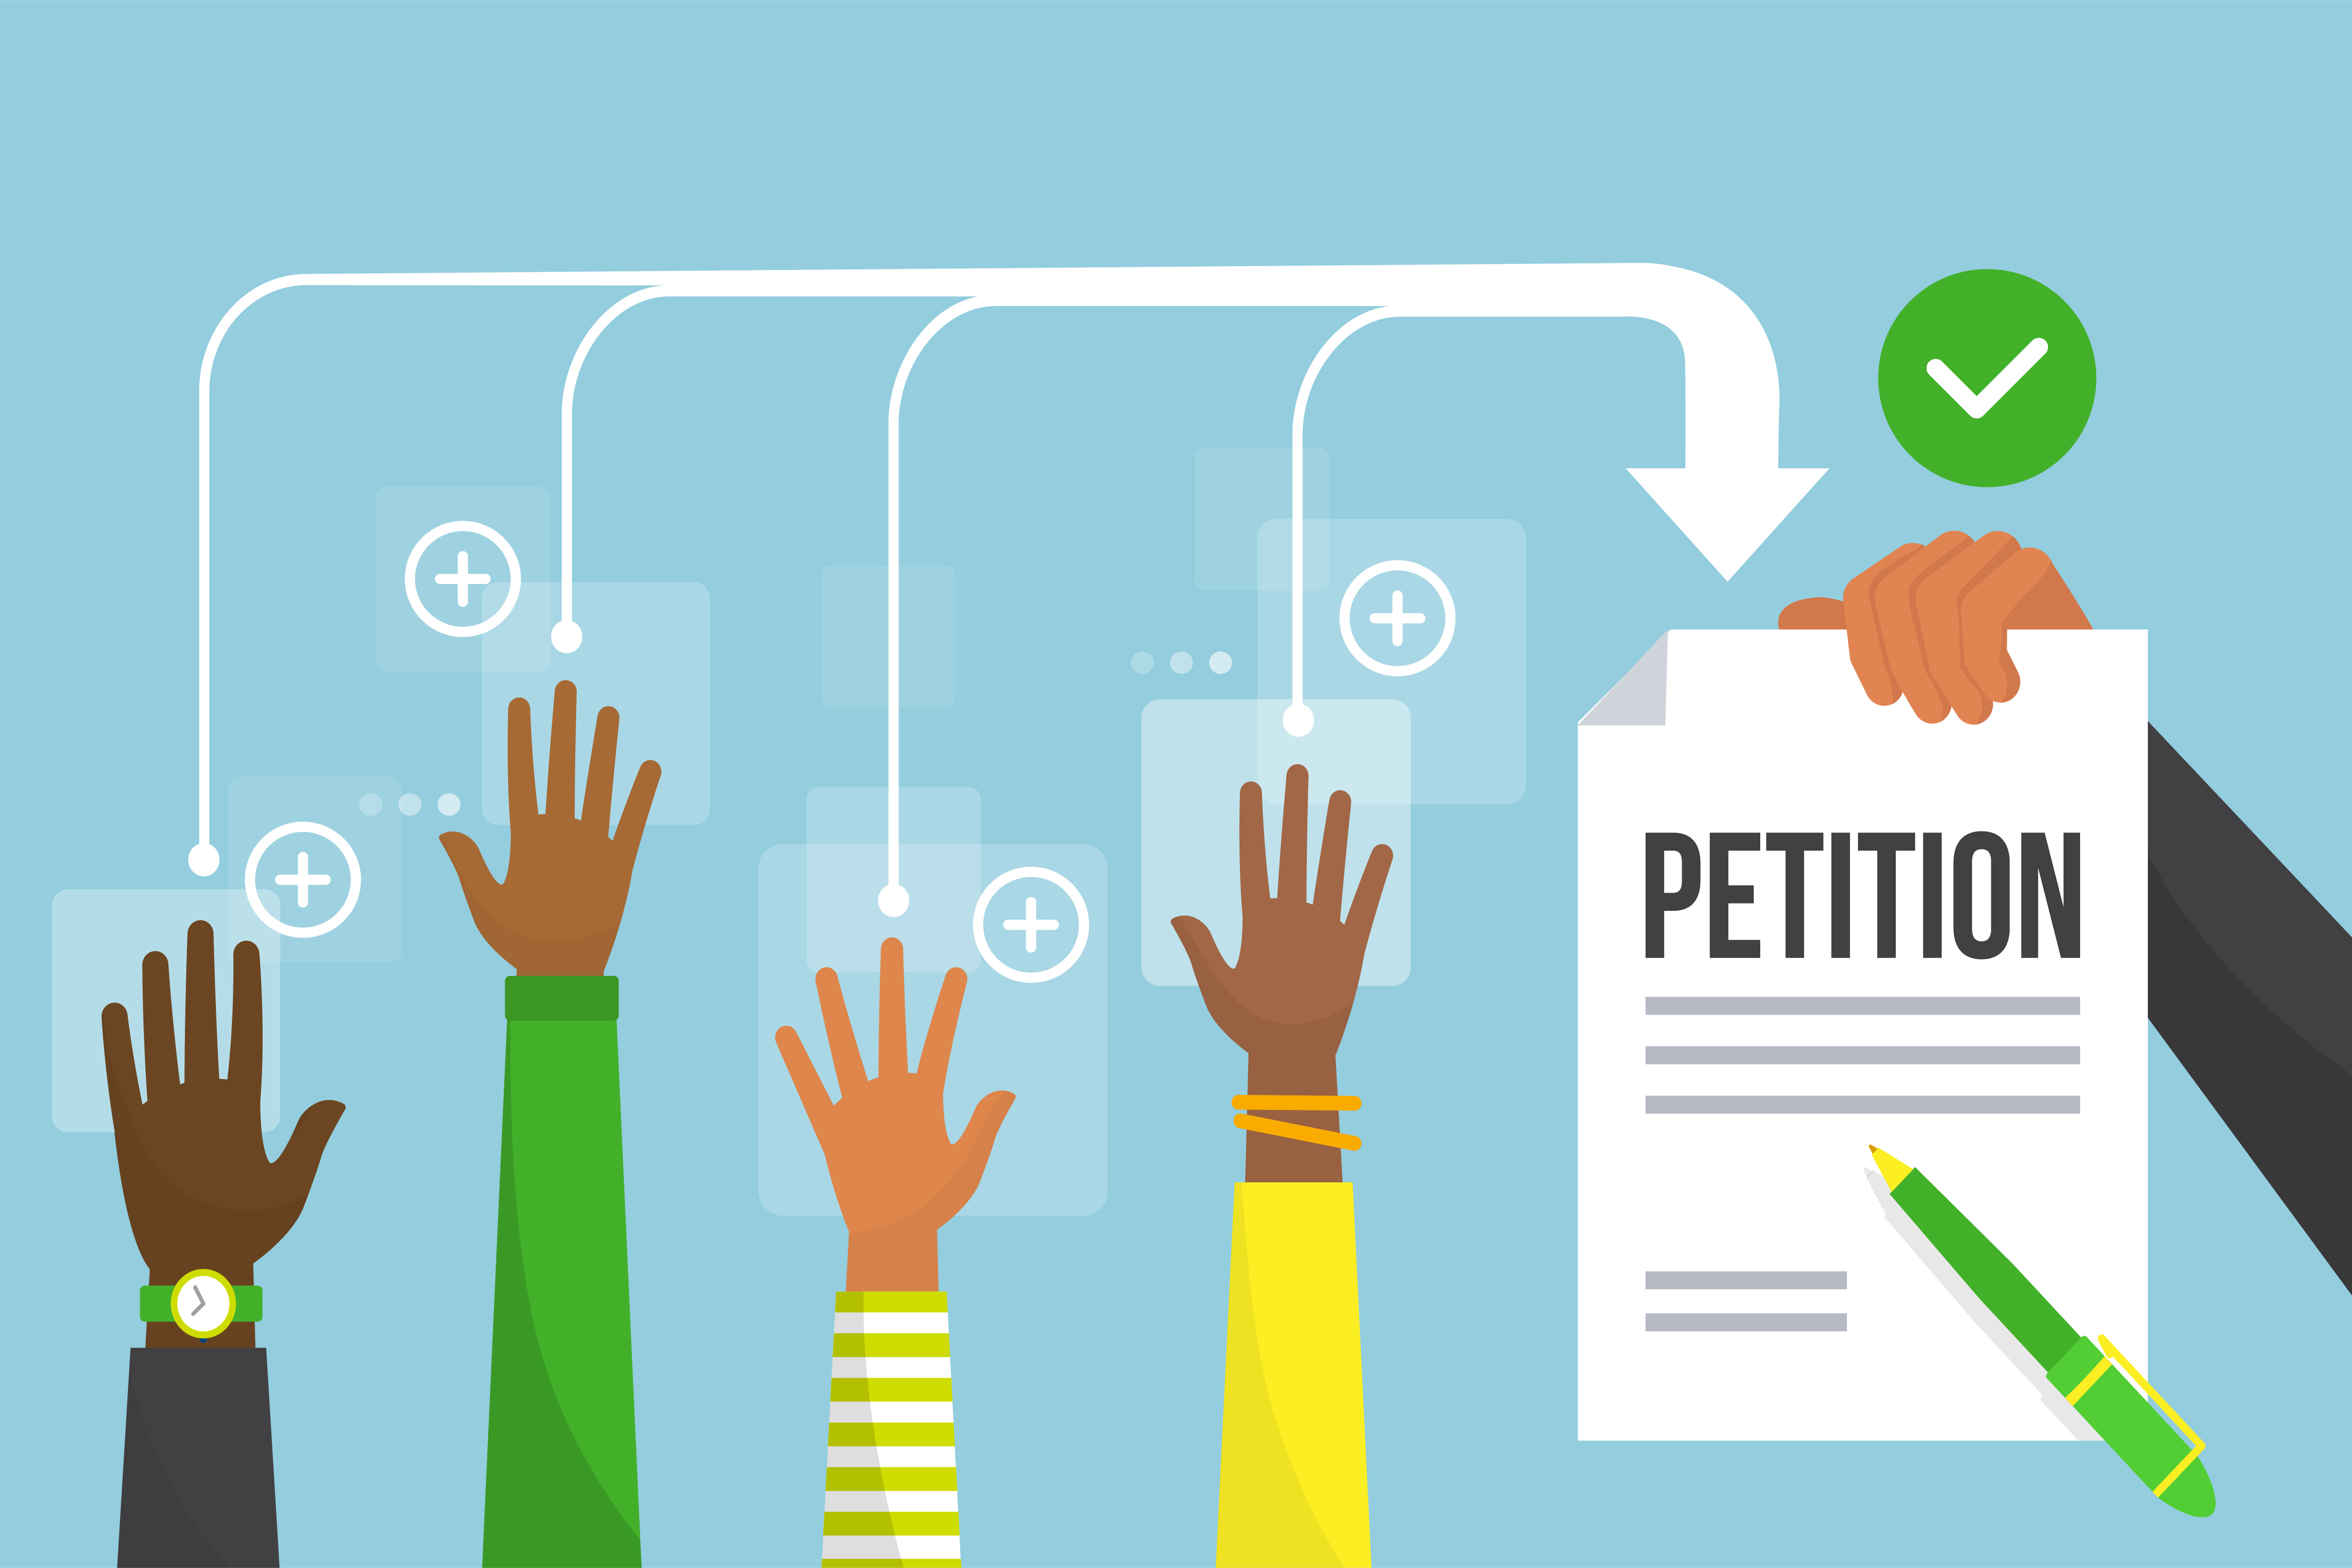 sign the petition graphic to overturn CRTC decision